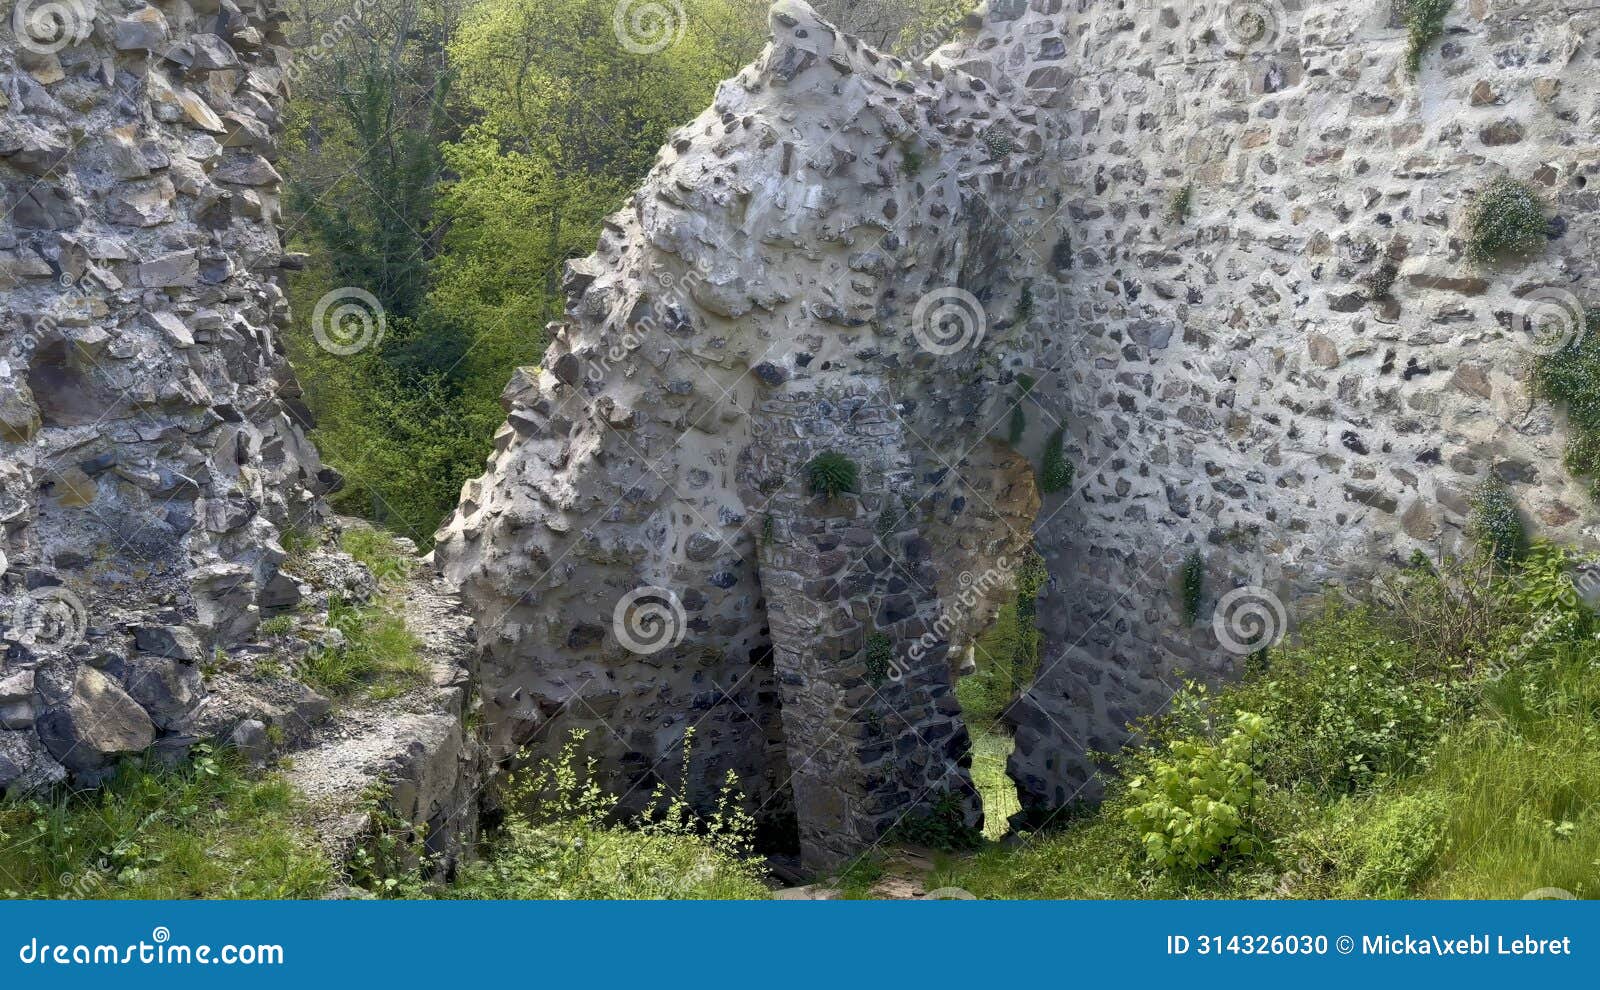 enigmatic ruins of hugstein castle overlooking the florival valley, vestige of history amidst verdant nature